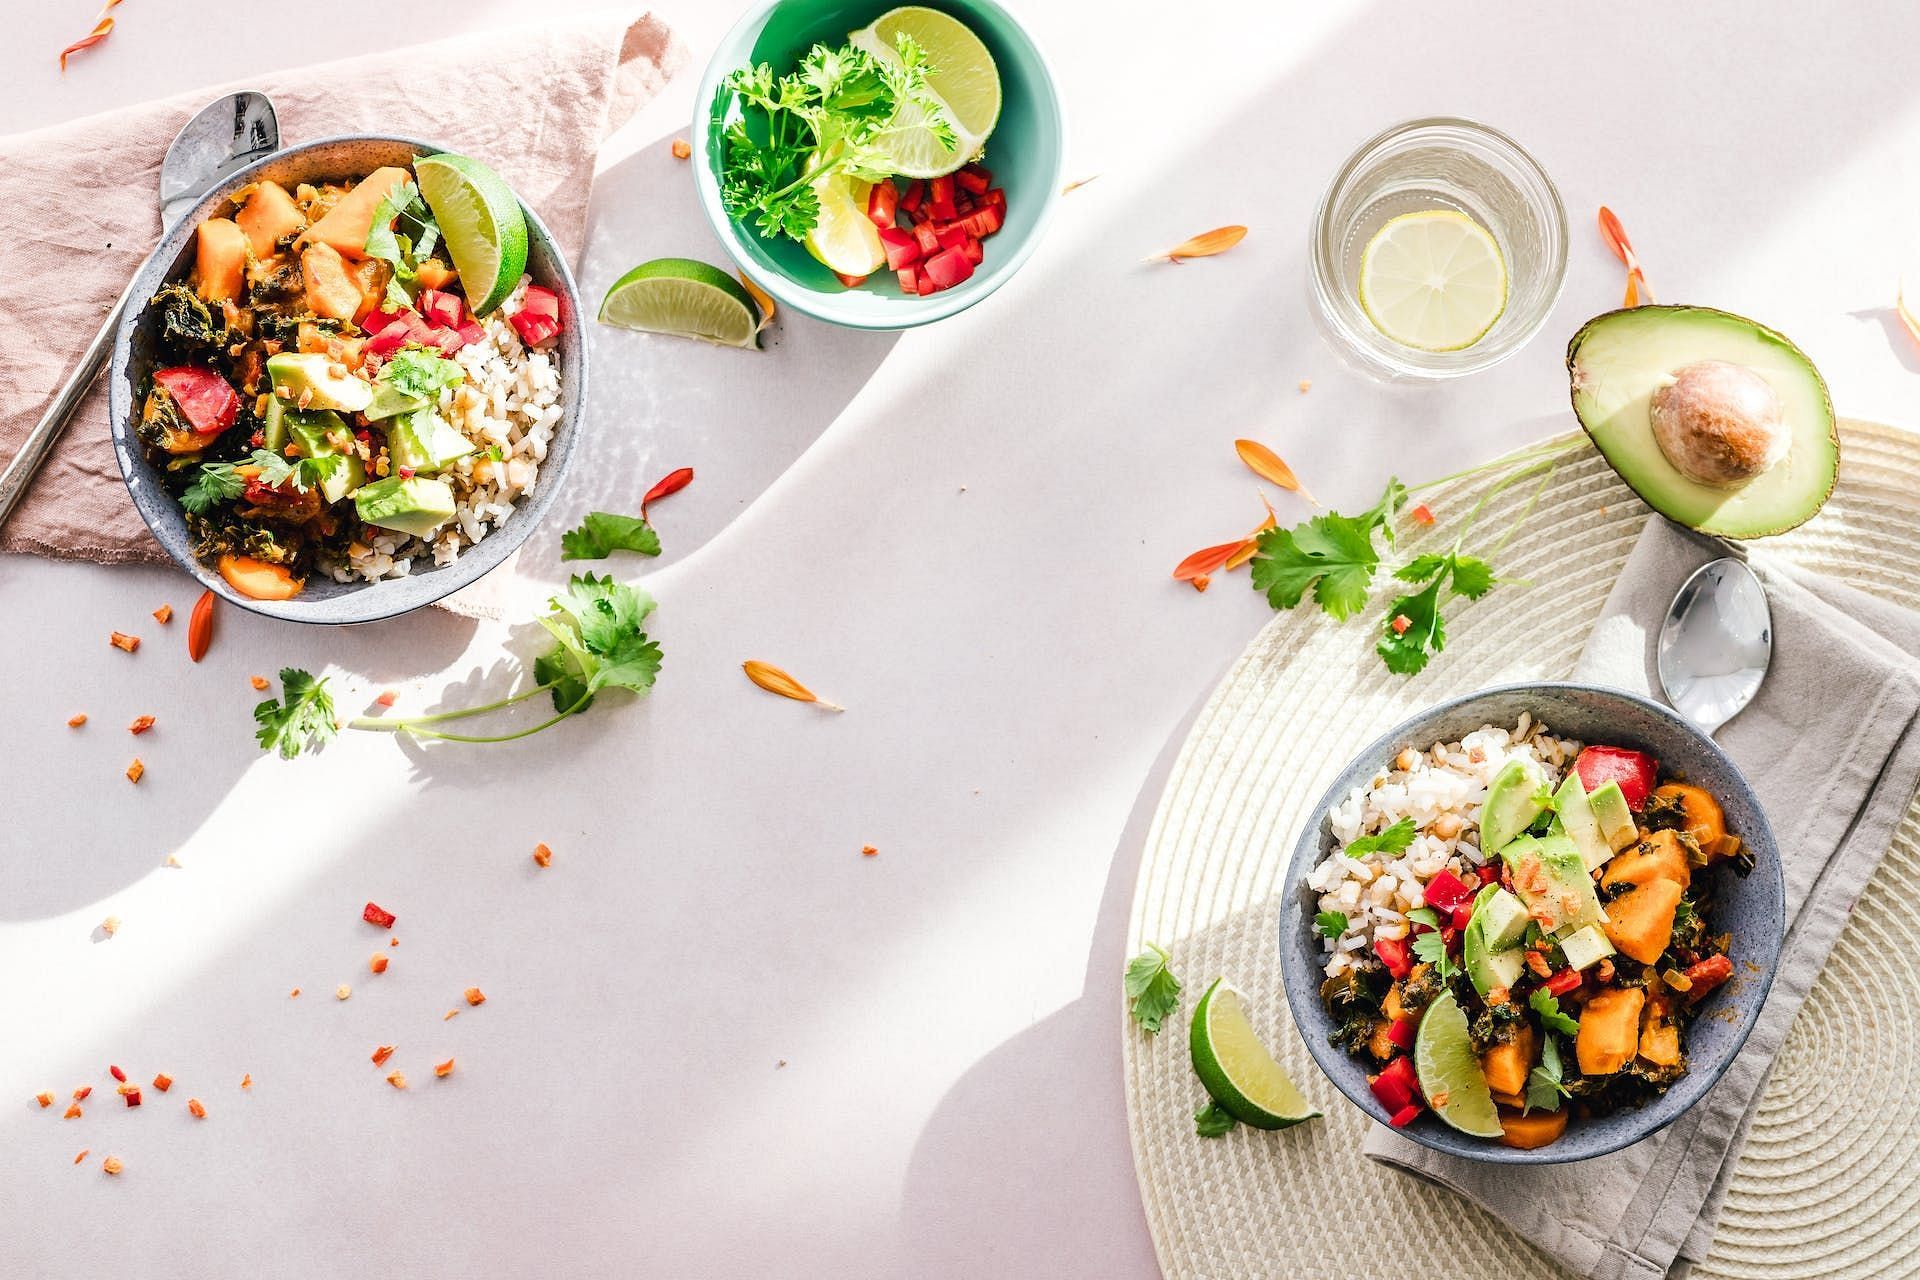 Keto-friendly foods can be a very healthy adding to your salads (Image via Pexels/Ella Olsson)